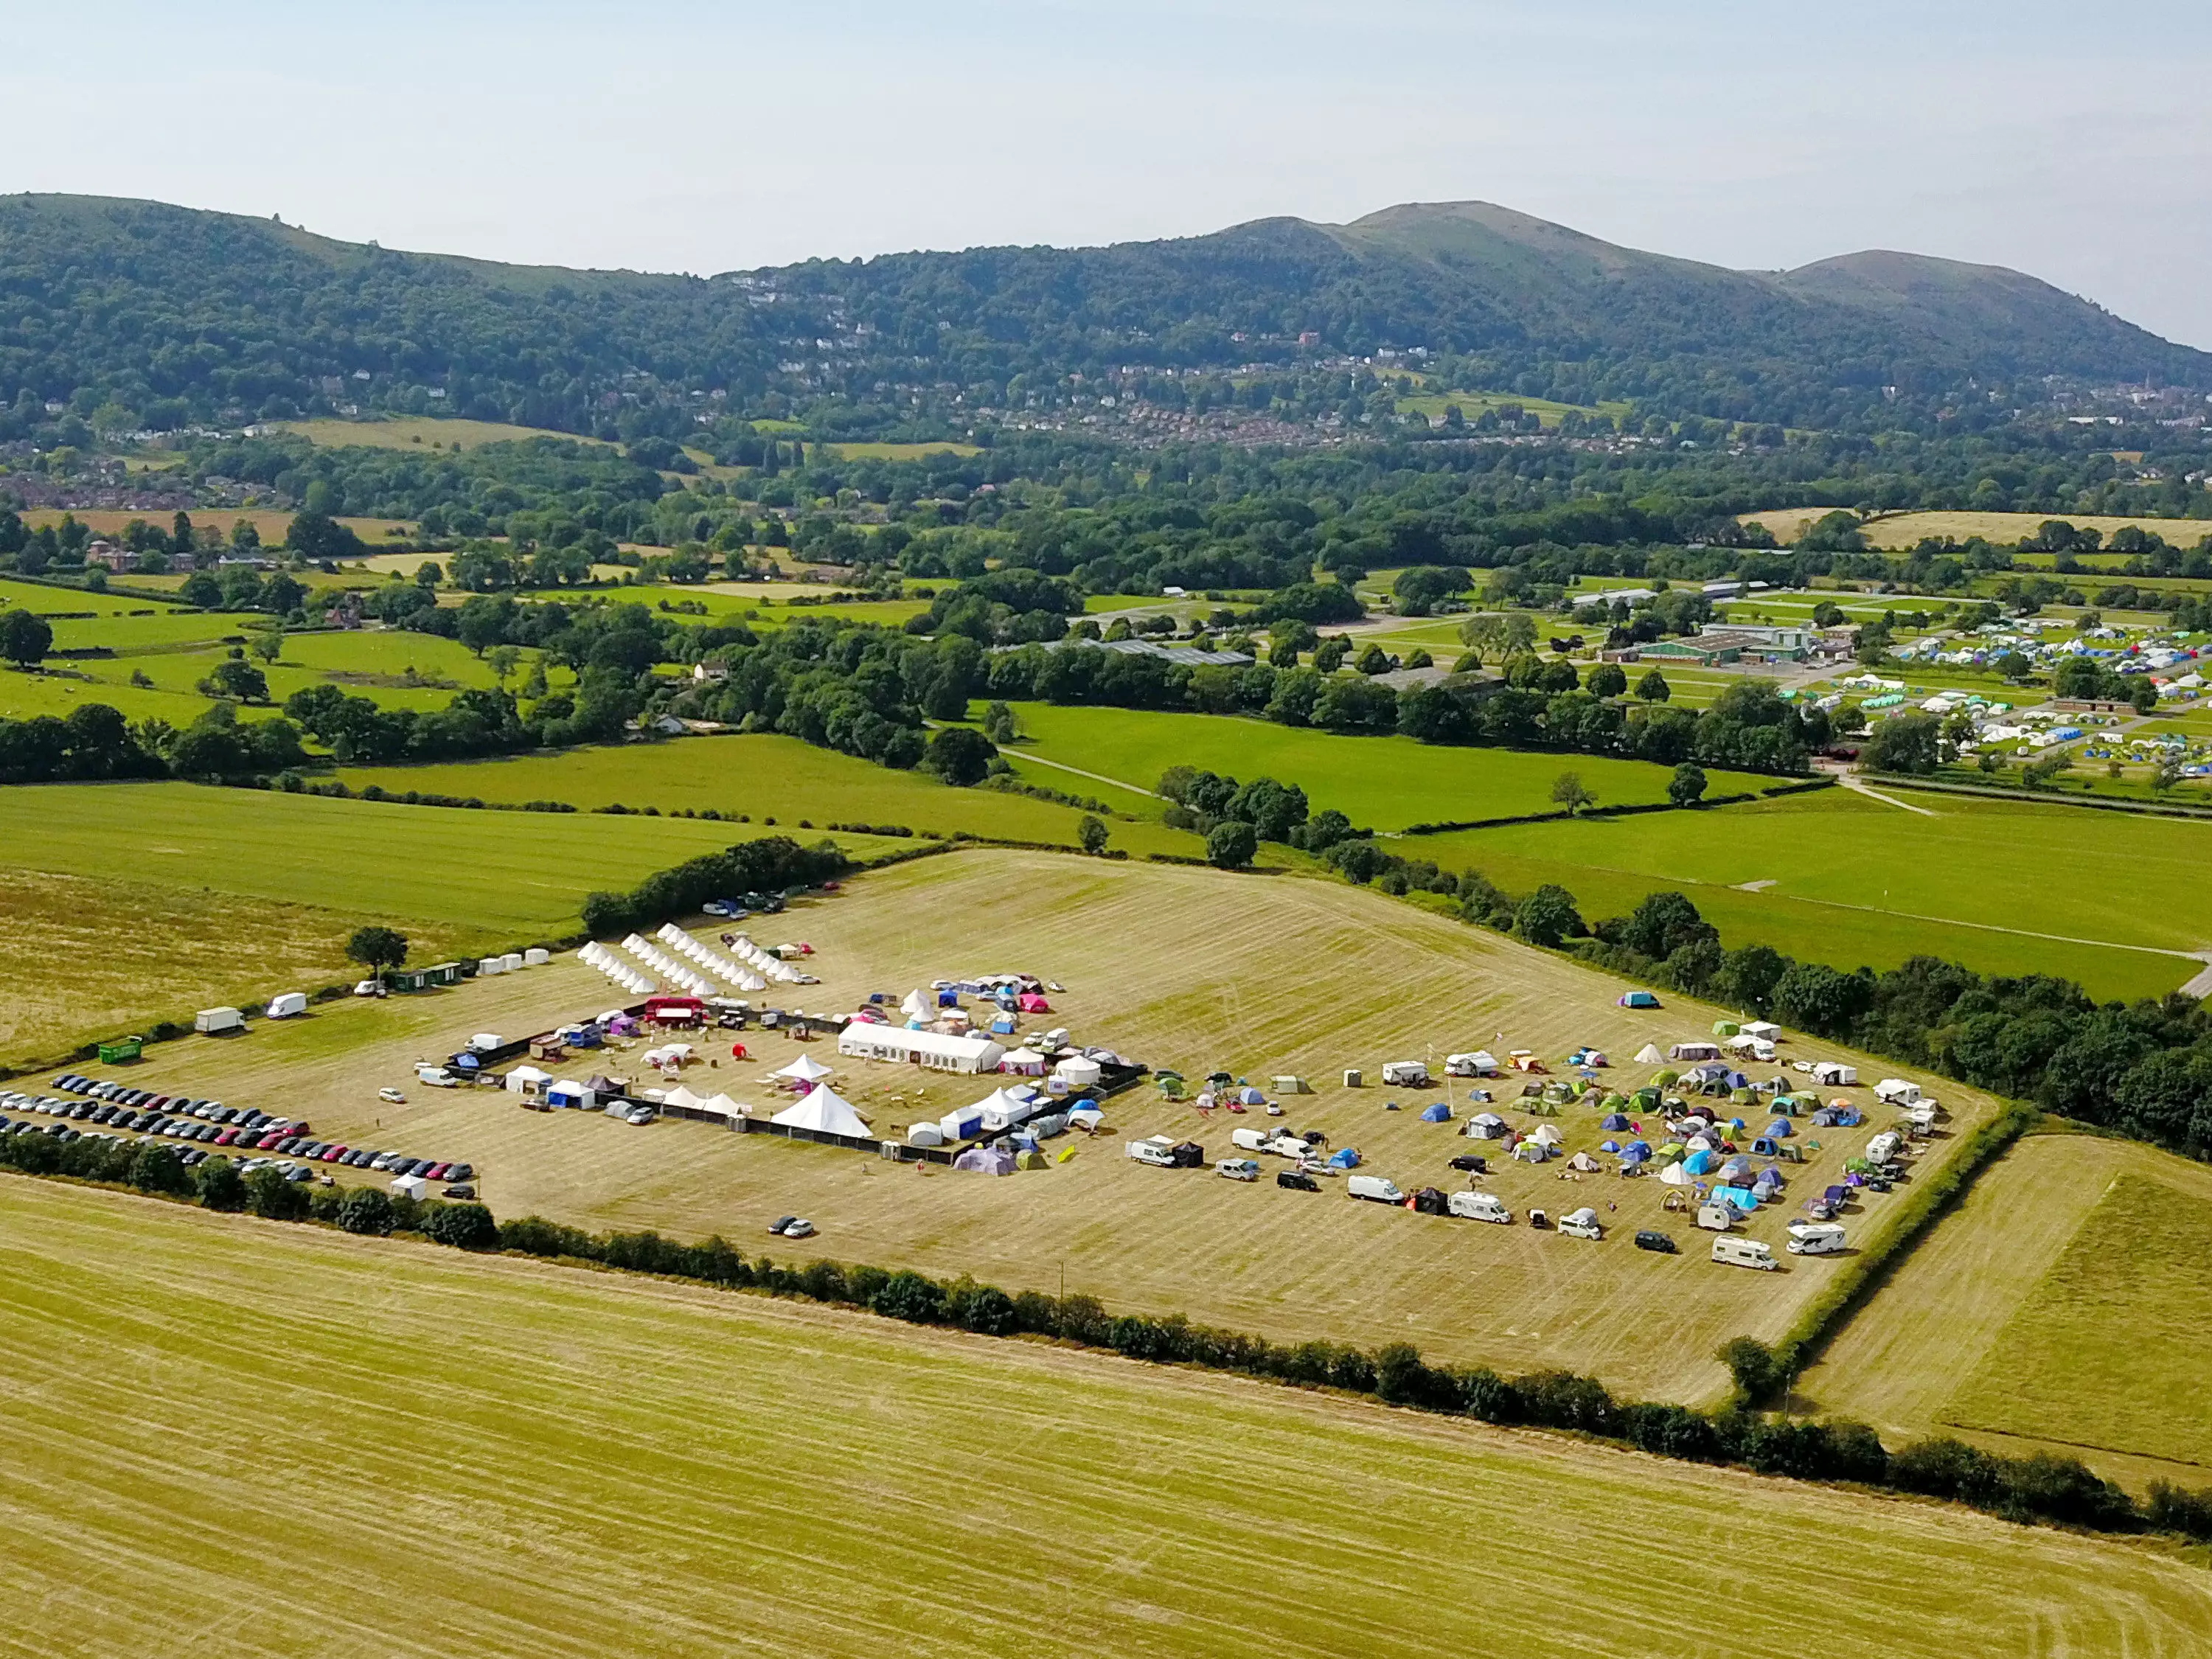 The UK's biggest swingers' festival was cancelled due to coronavirus.